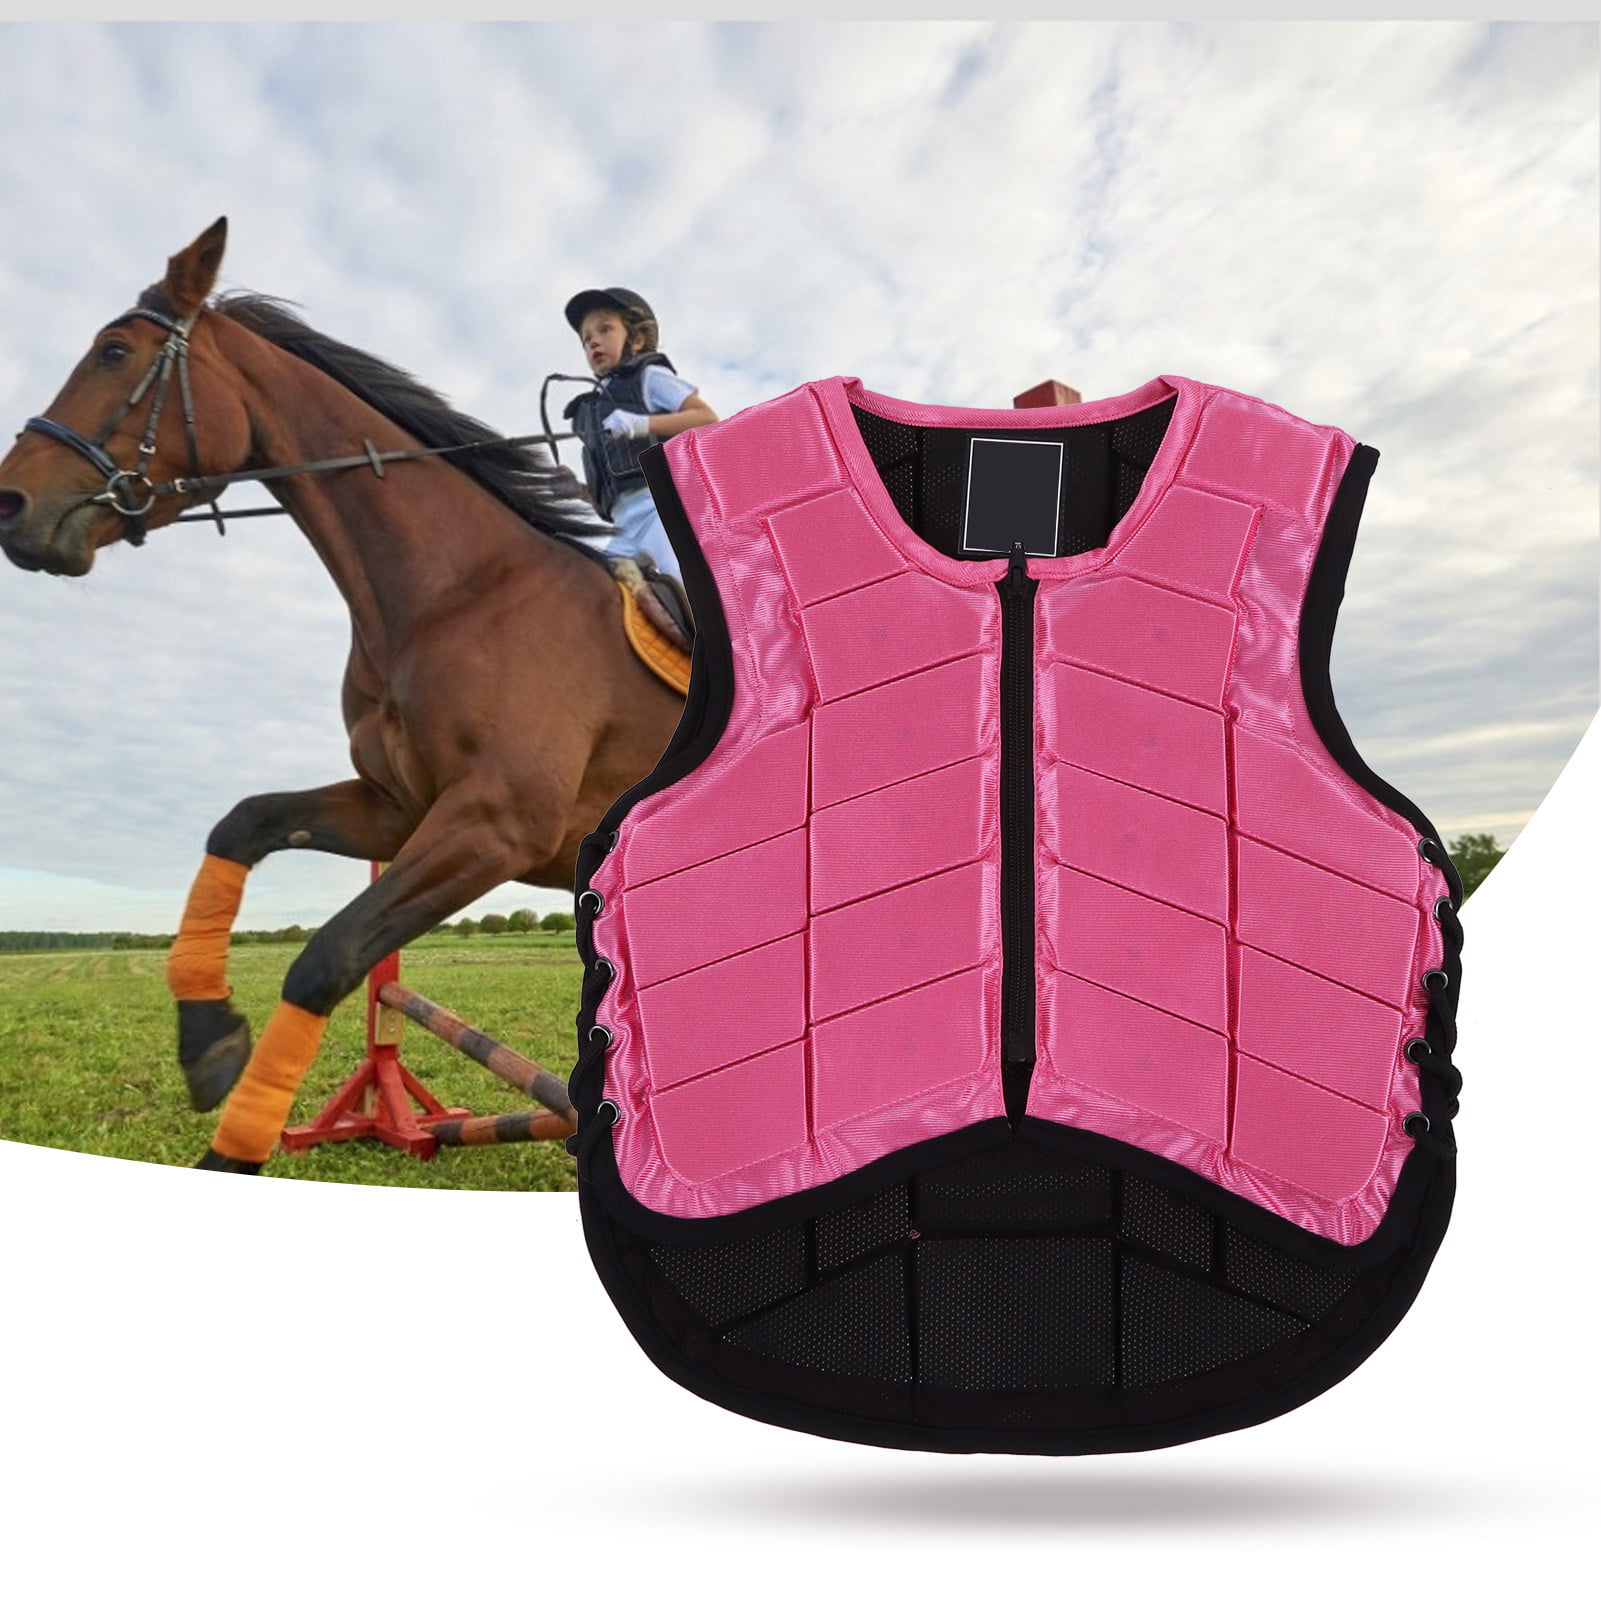 Kids Equestrian Protective Vest Horse Riding Vest Body Protector Safety 